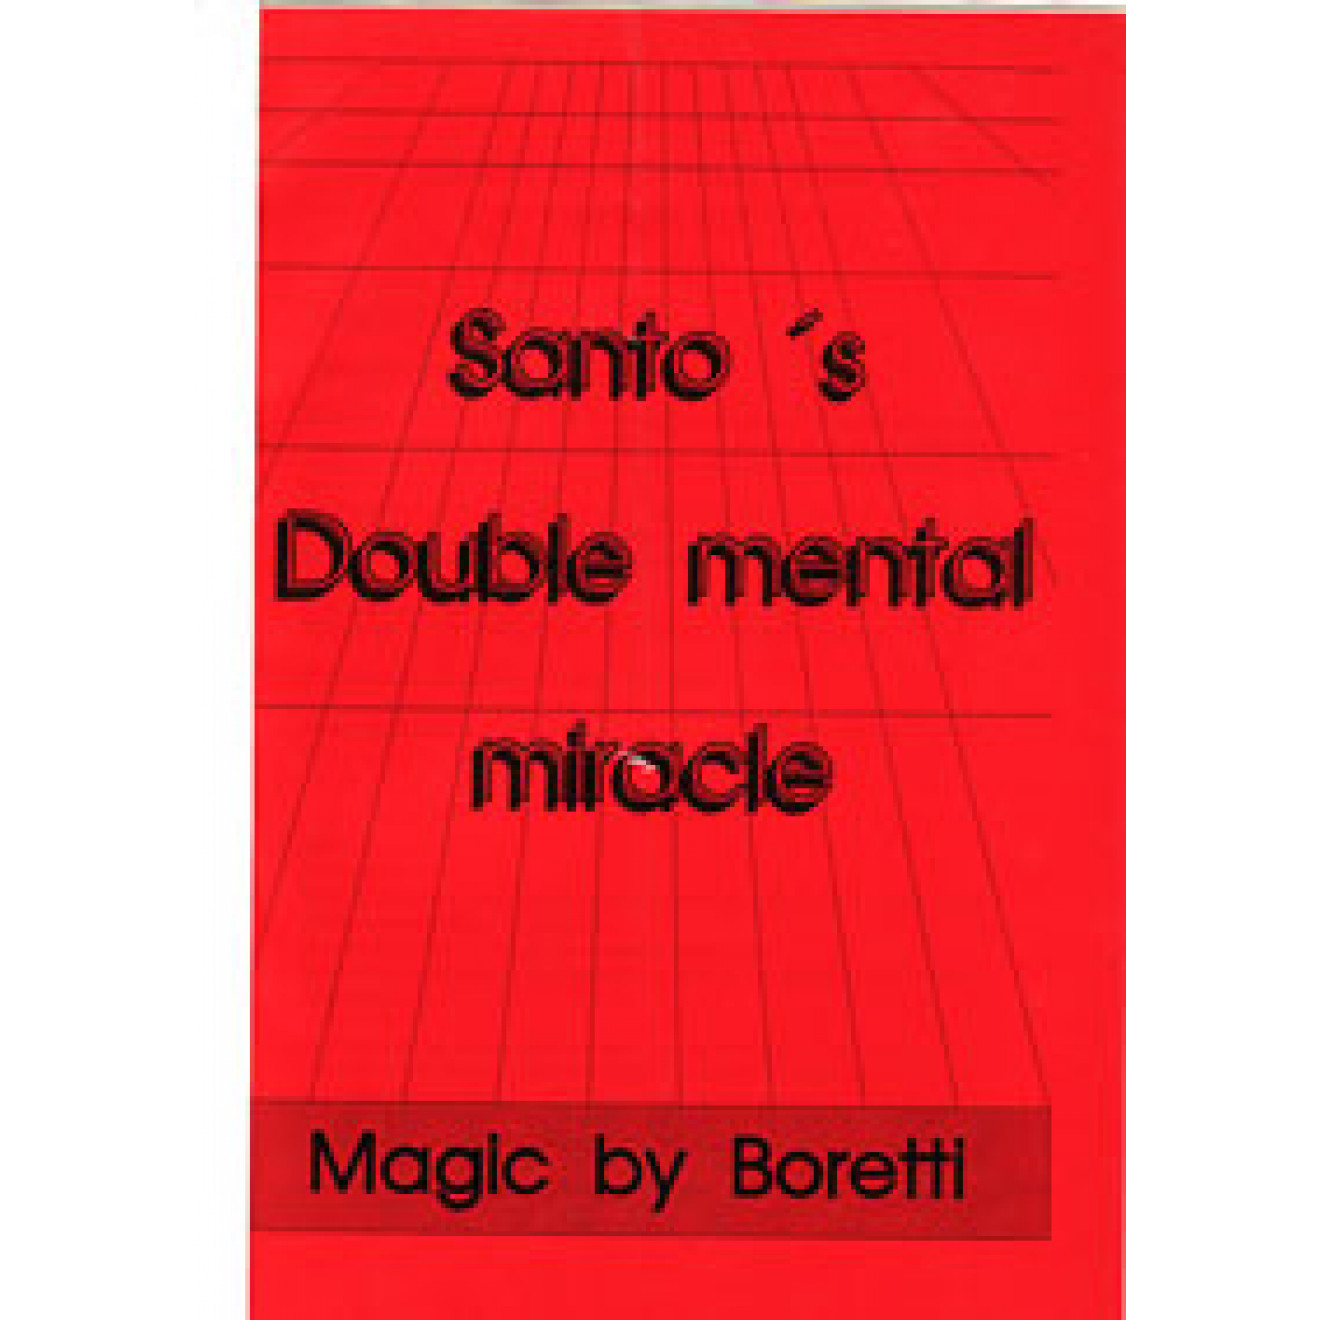 Santo's Double mental miracle